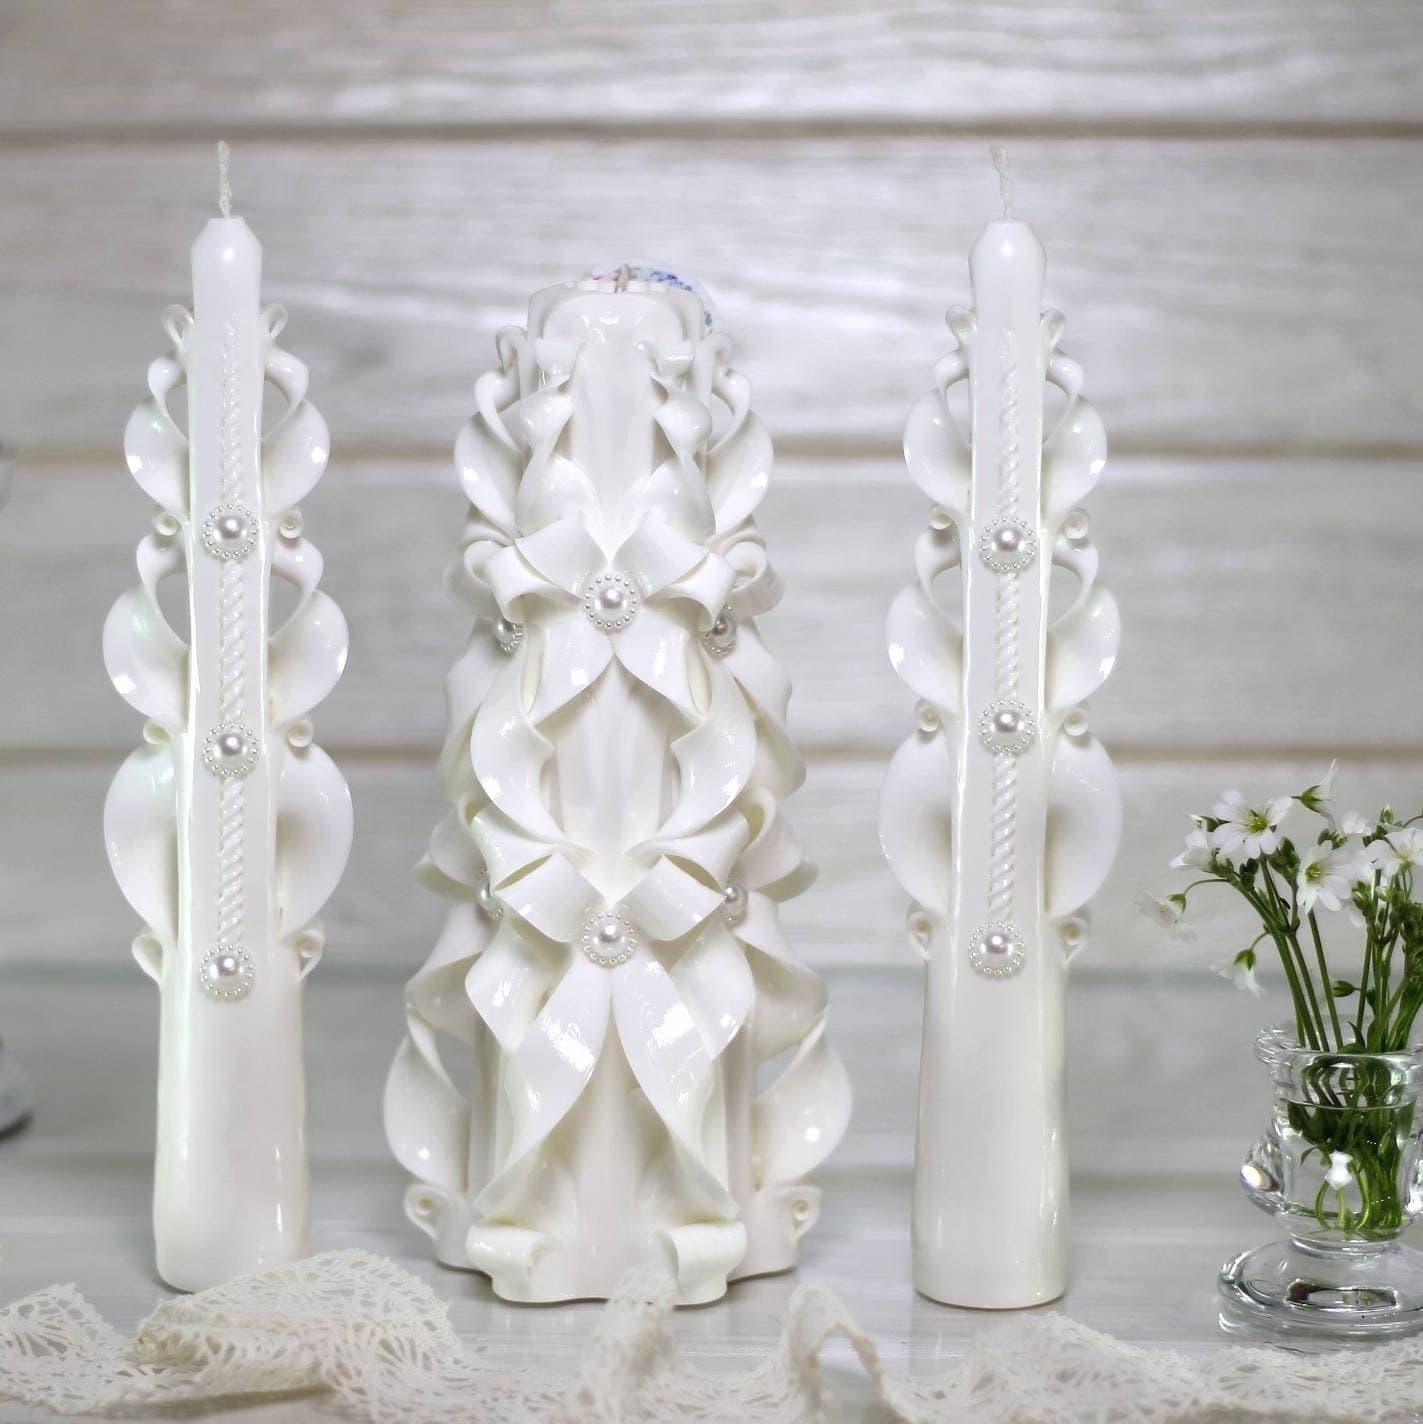 3 White Taper Candles, White Wedding Candles, White Decorations, Table  Candles, Party Decorations, White Party Decorations 